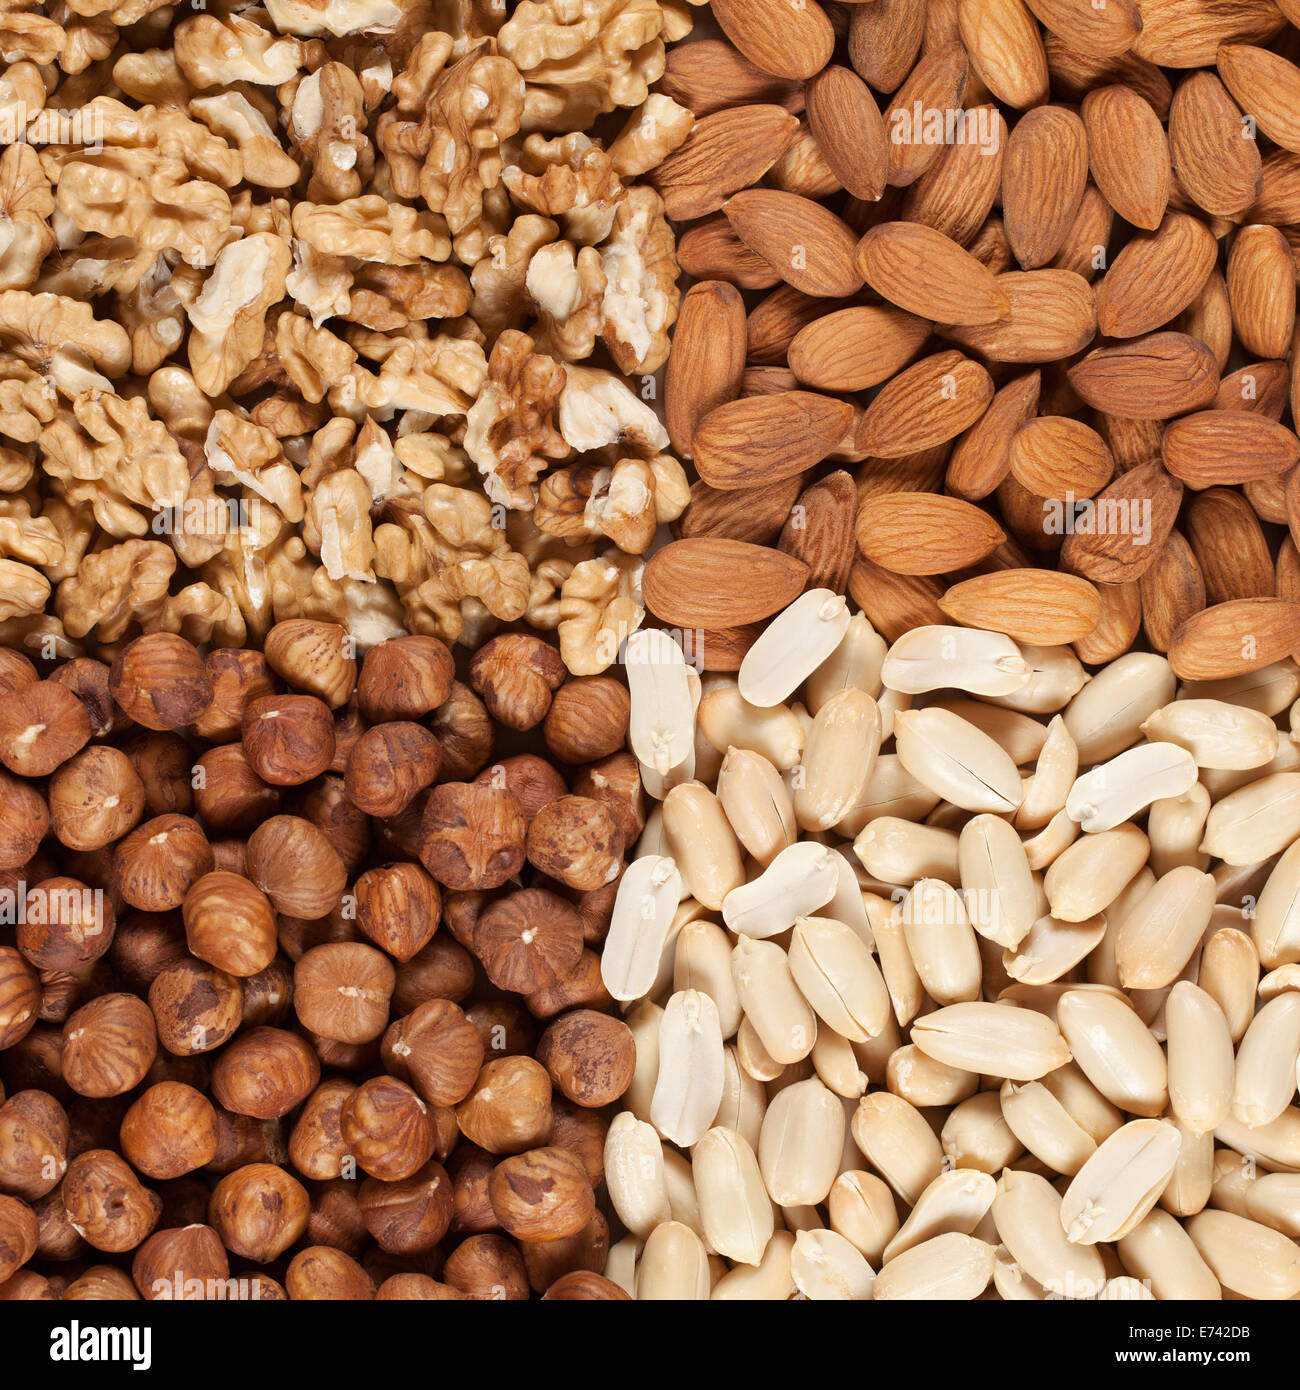 Peanuts, walnuts, almonds and hazelnuts forming a background Stock Photo